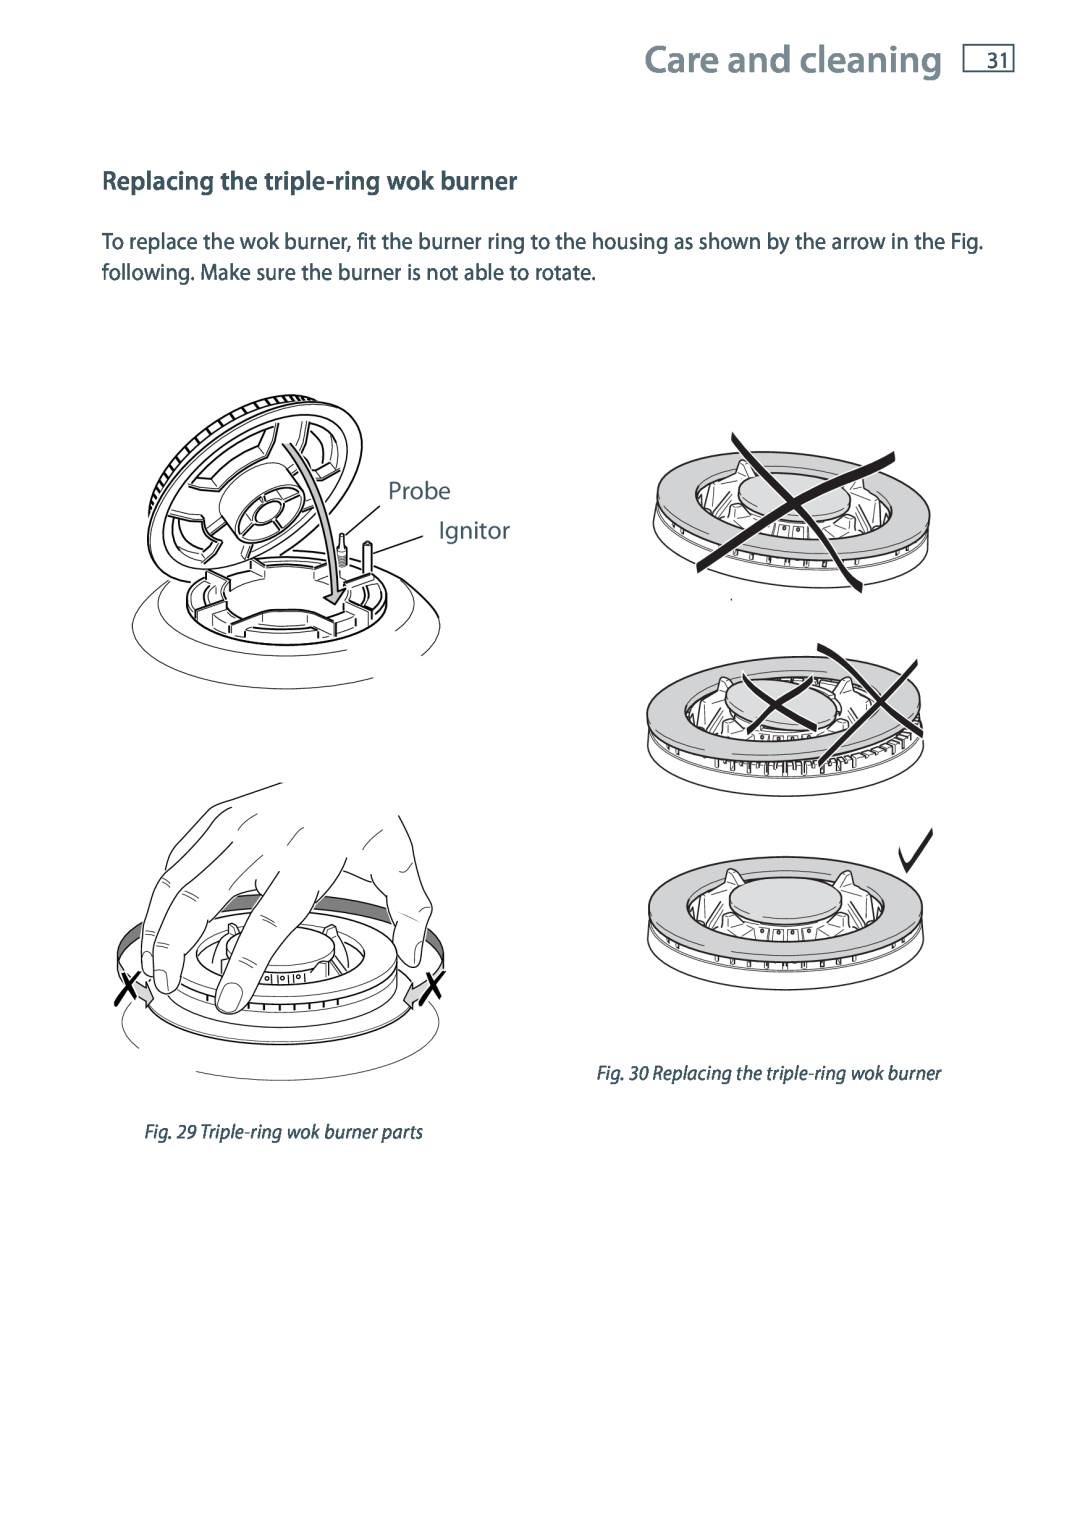 Fisher & Paykel OR120 installation instructions Care and cleaning, Replacing the triple-ring wok burner, Probe Ignitor 